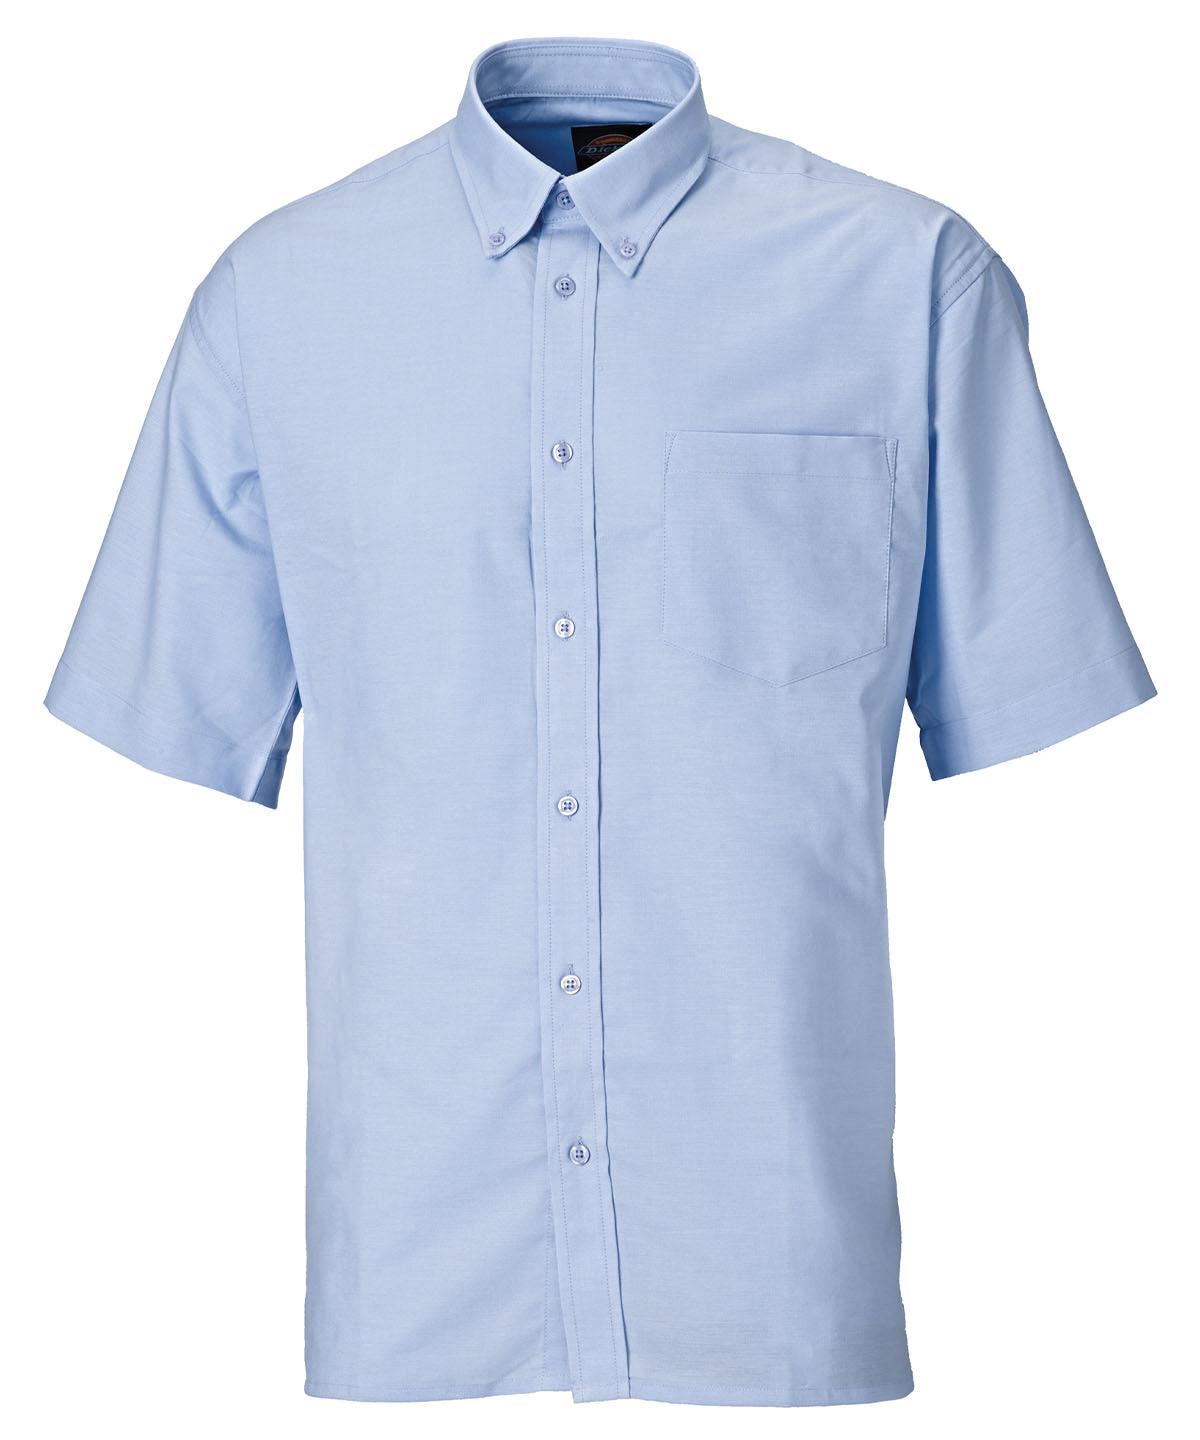 White - Oxford weave short sleeve shirt (SH64250) Shirts Last Chance to Buy Shirts & Blouses, Workwear Schoolwear Centres